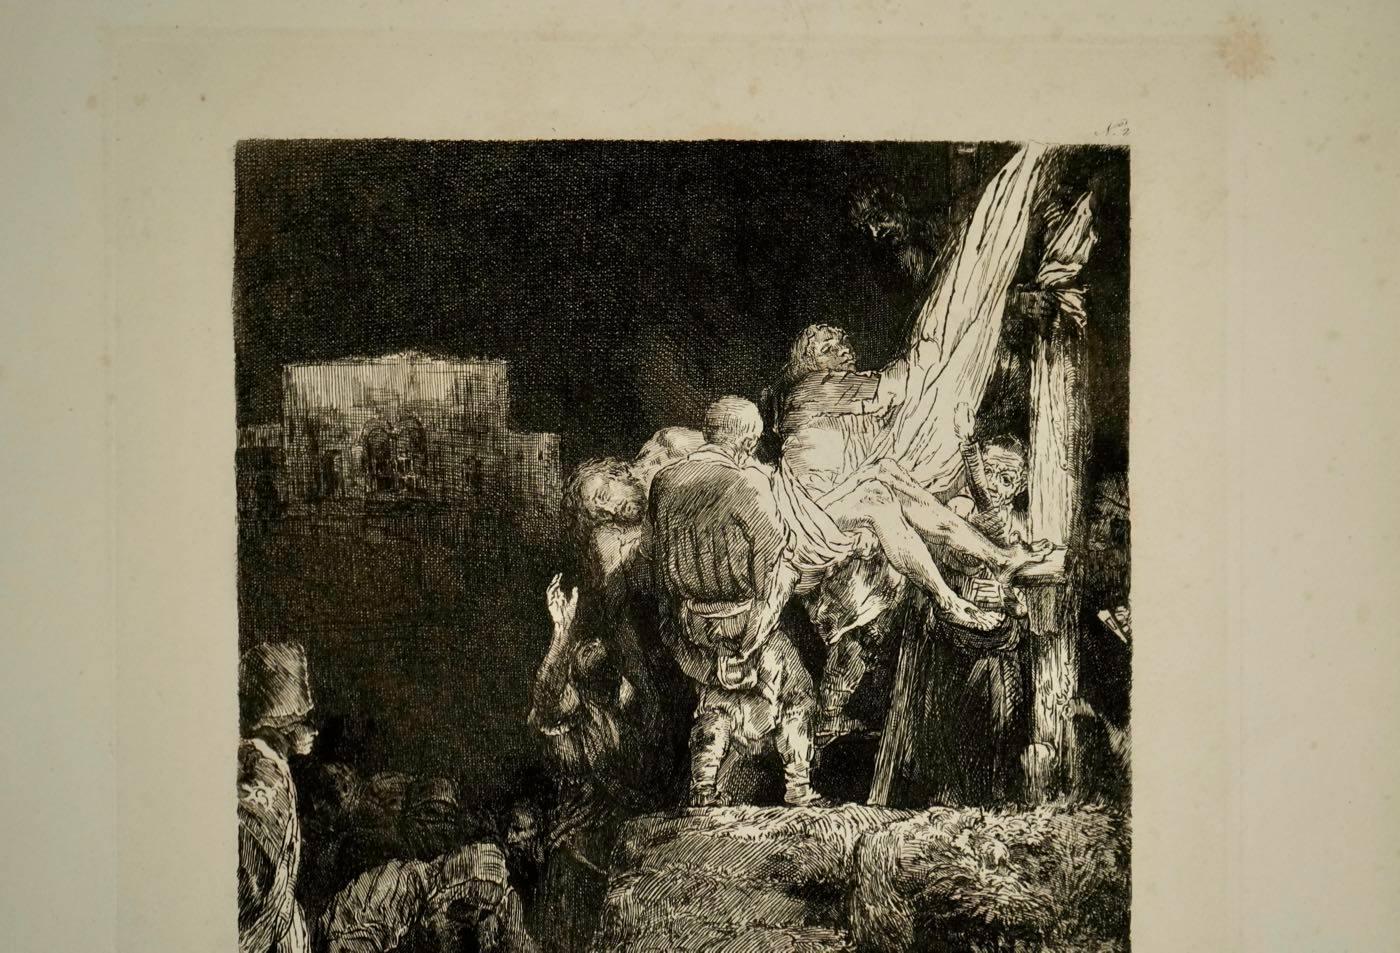 Steel engraving from the 19th century of Rembrandt by Francesco Novelisme, 1992.
Measures: H 21cm, L 16cm.